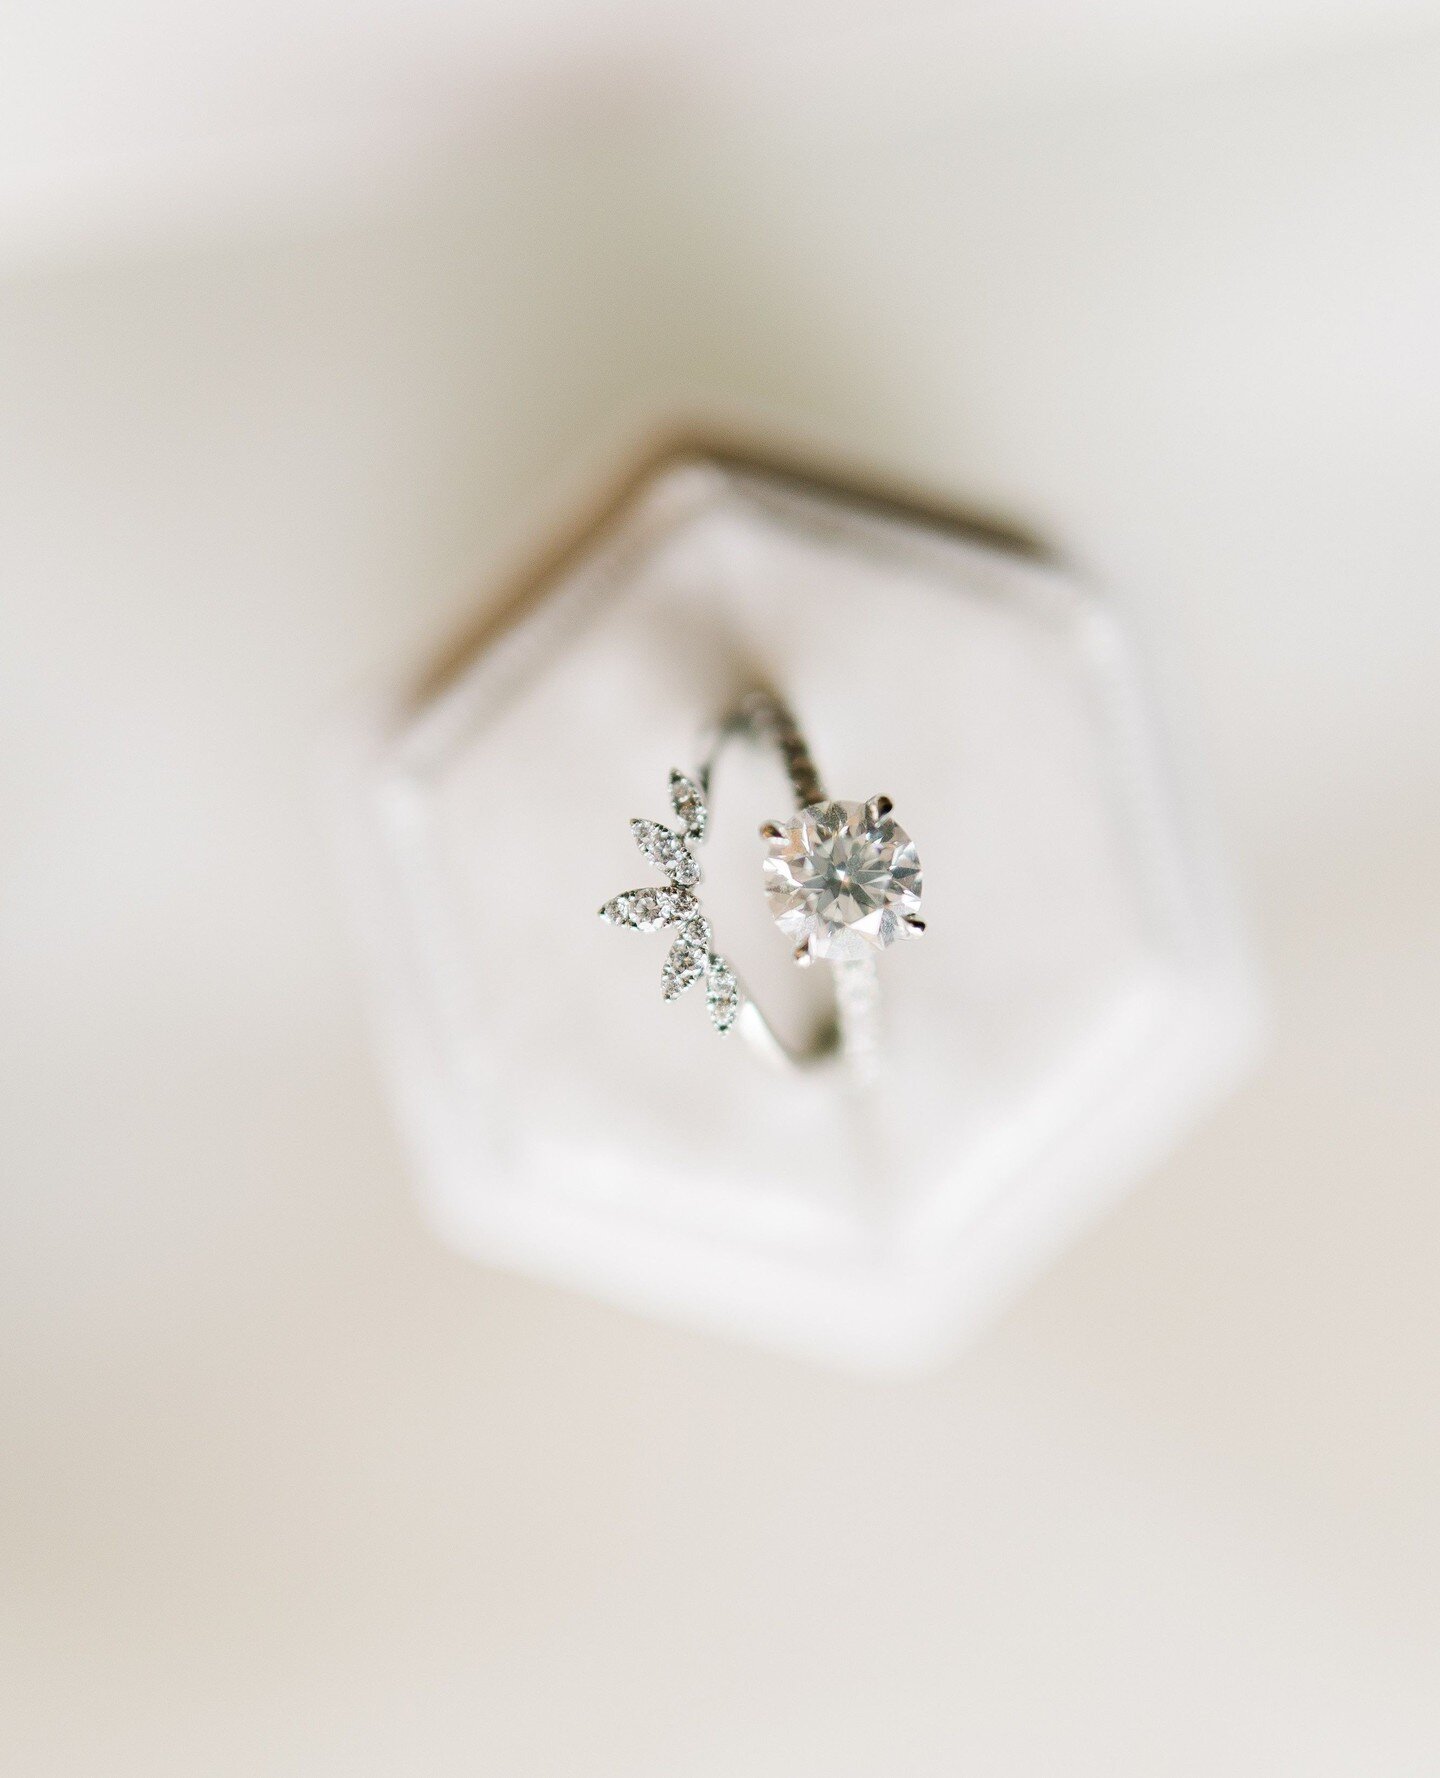 Every detail is etched with love, creating memories as timeless as this ring. 💍✨⁠
⁠
⁠
Photography &amp; Videography: @beautifullifebc⁠ ⁠
⁠